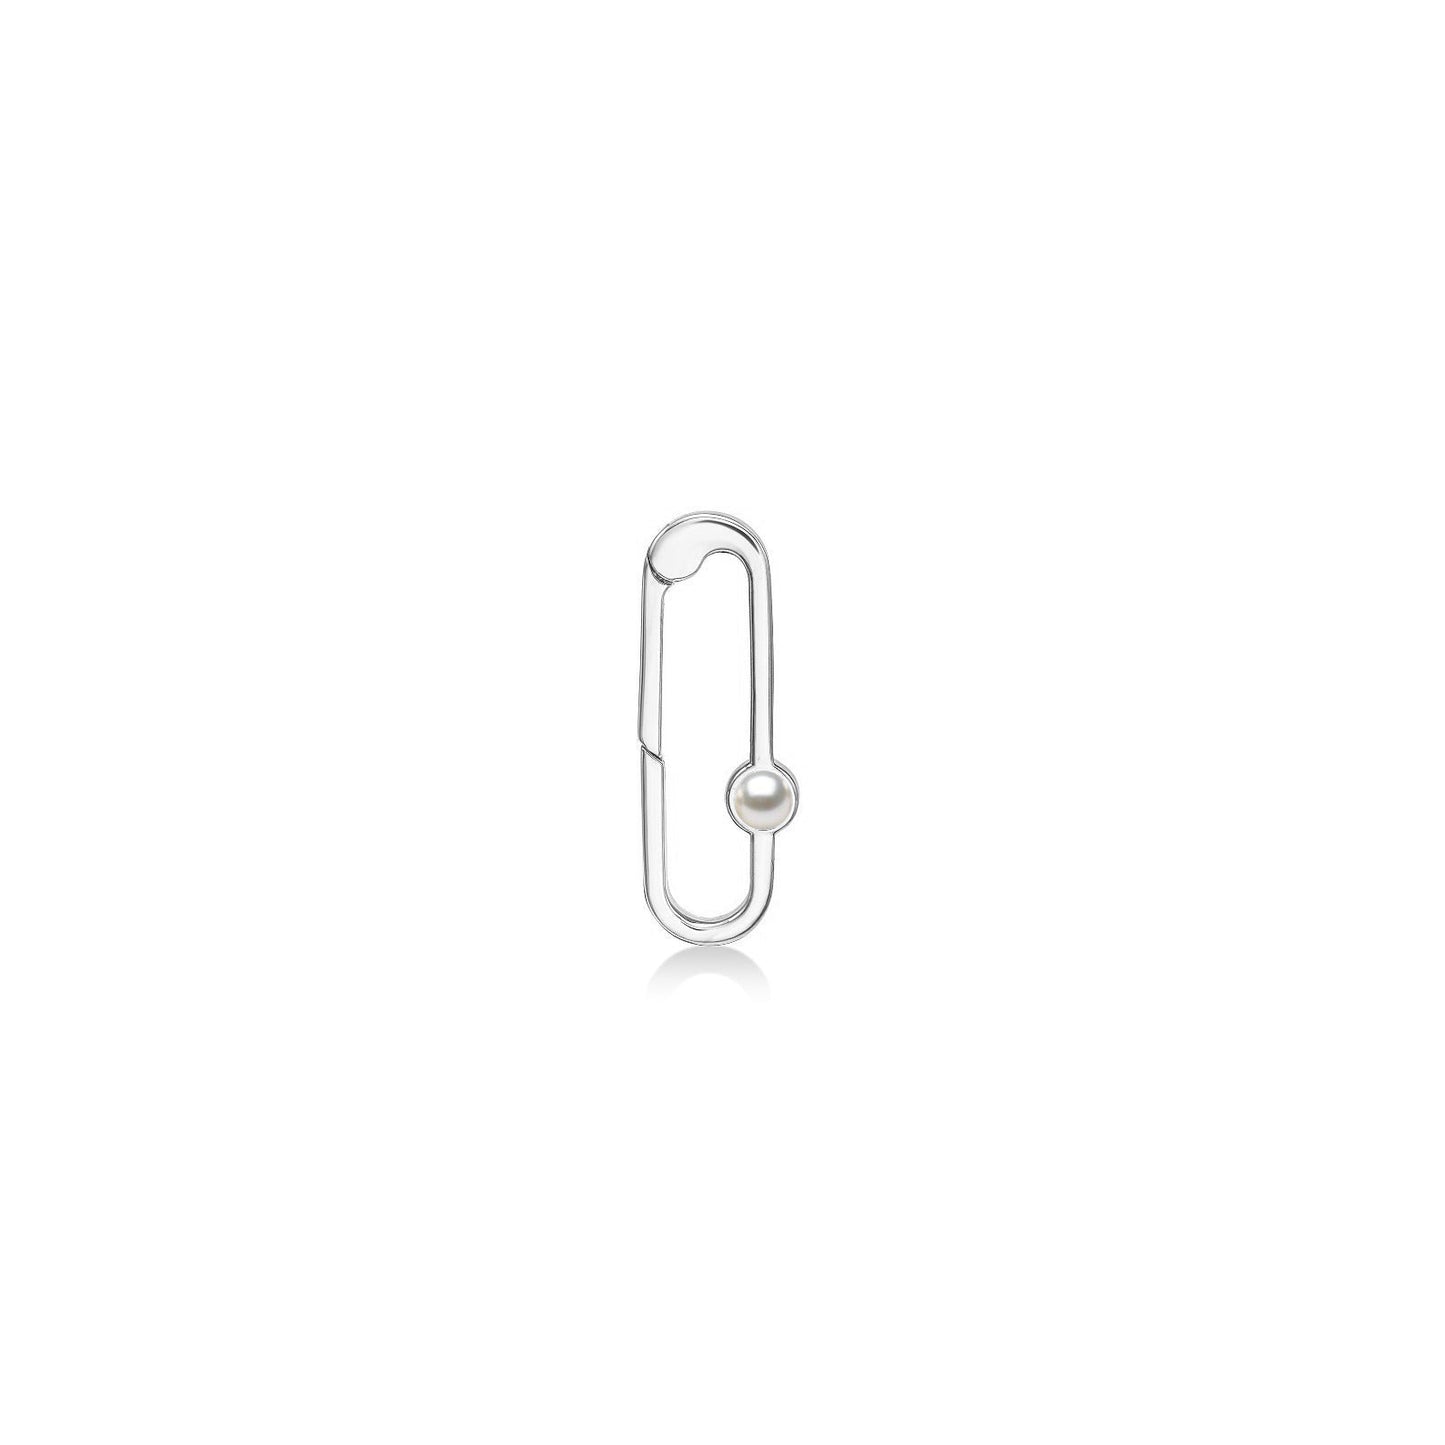 14k white gold paperclip charm lock with pearl